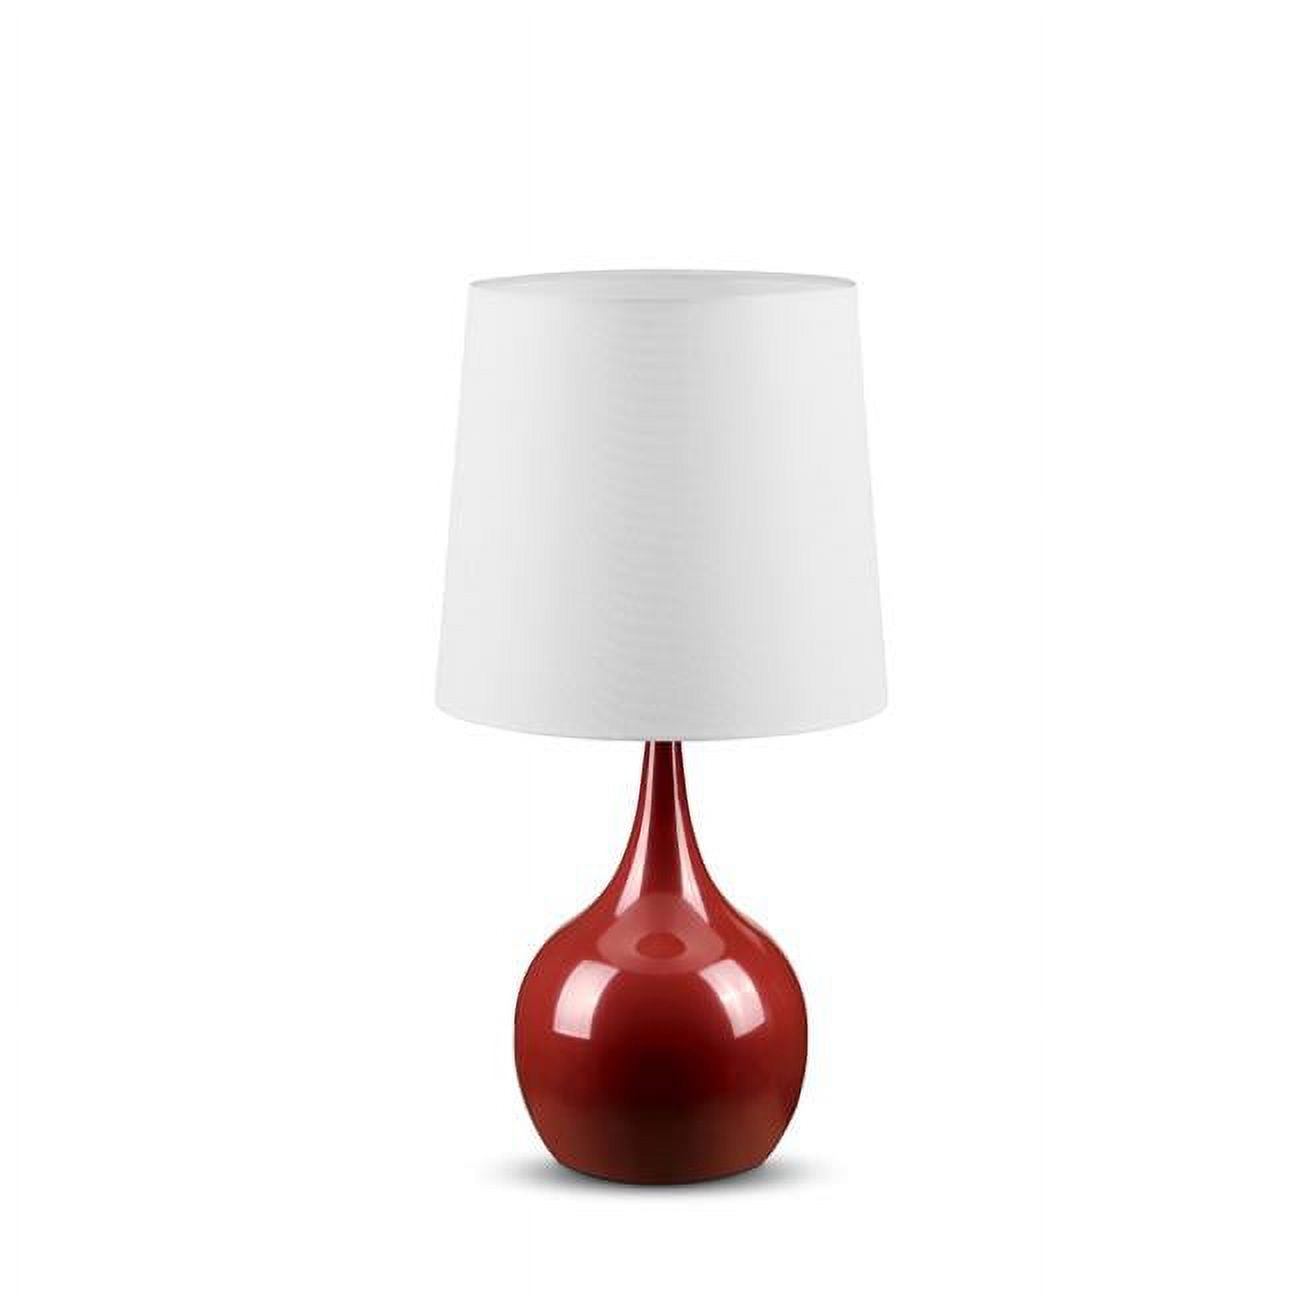 HomeRoots 468788 Minimalist Burgundy Table Lamp with Touch Switch - image 1 of 5